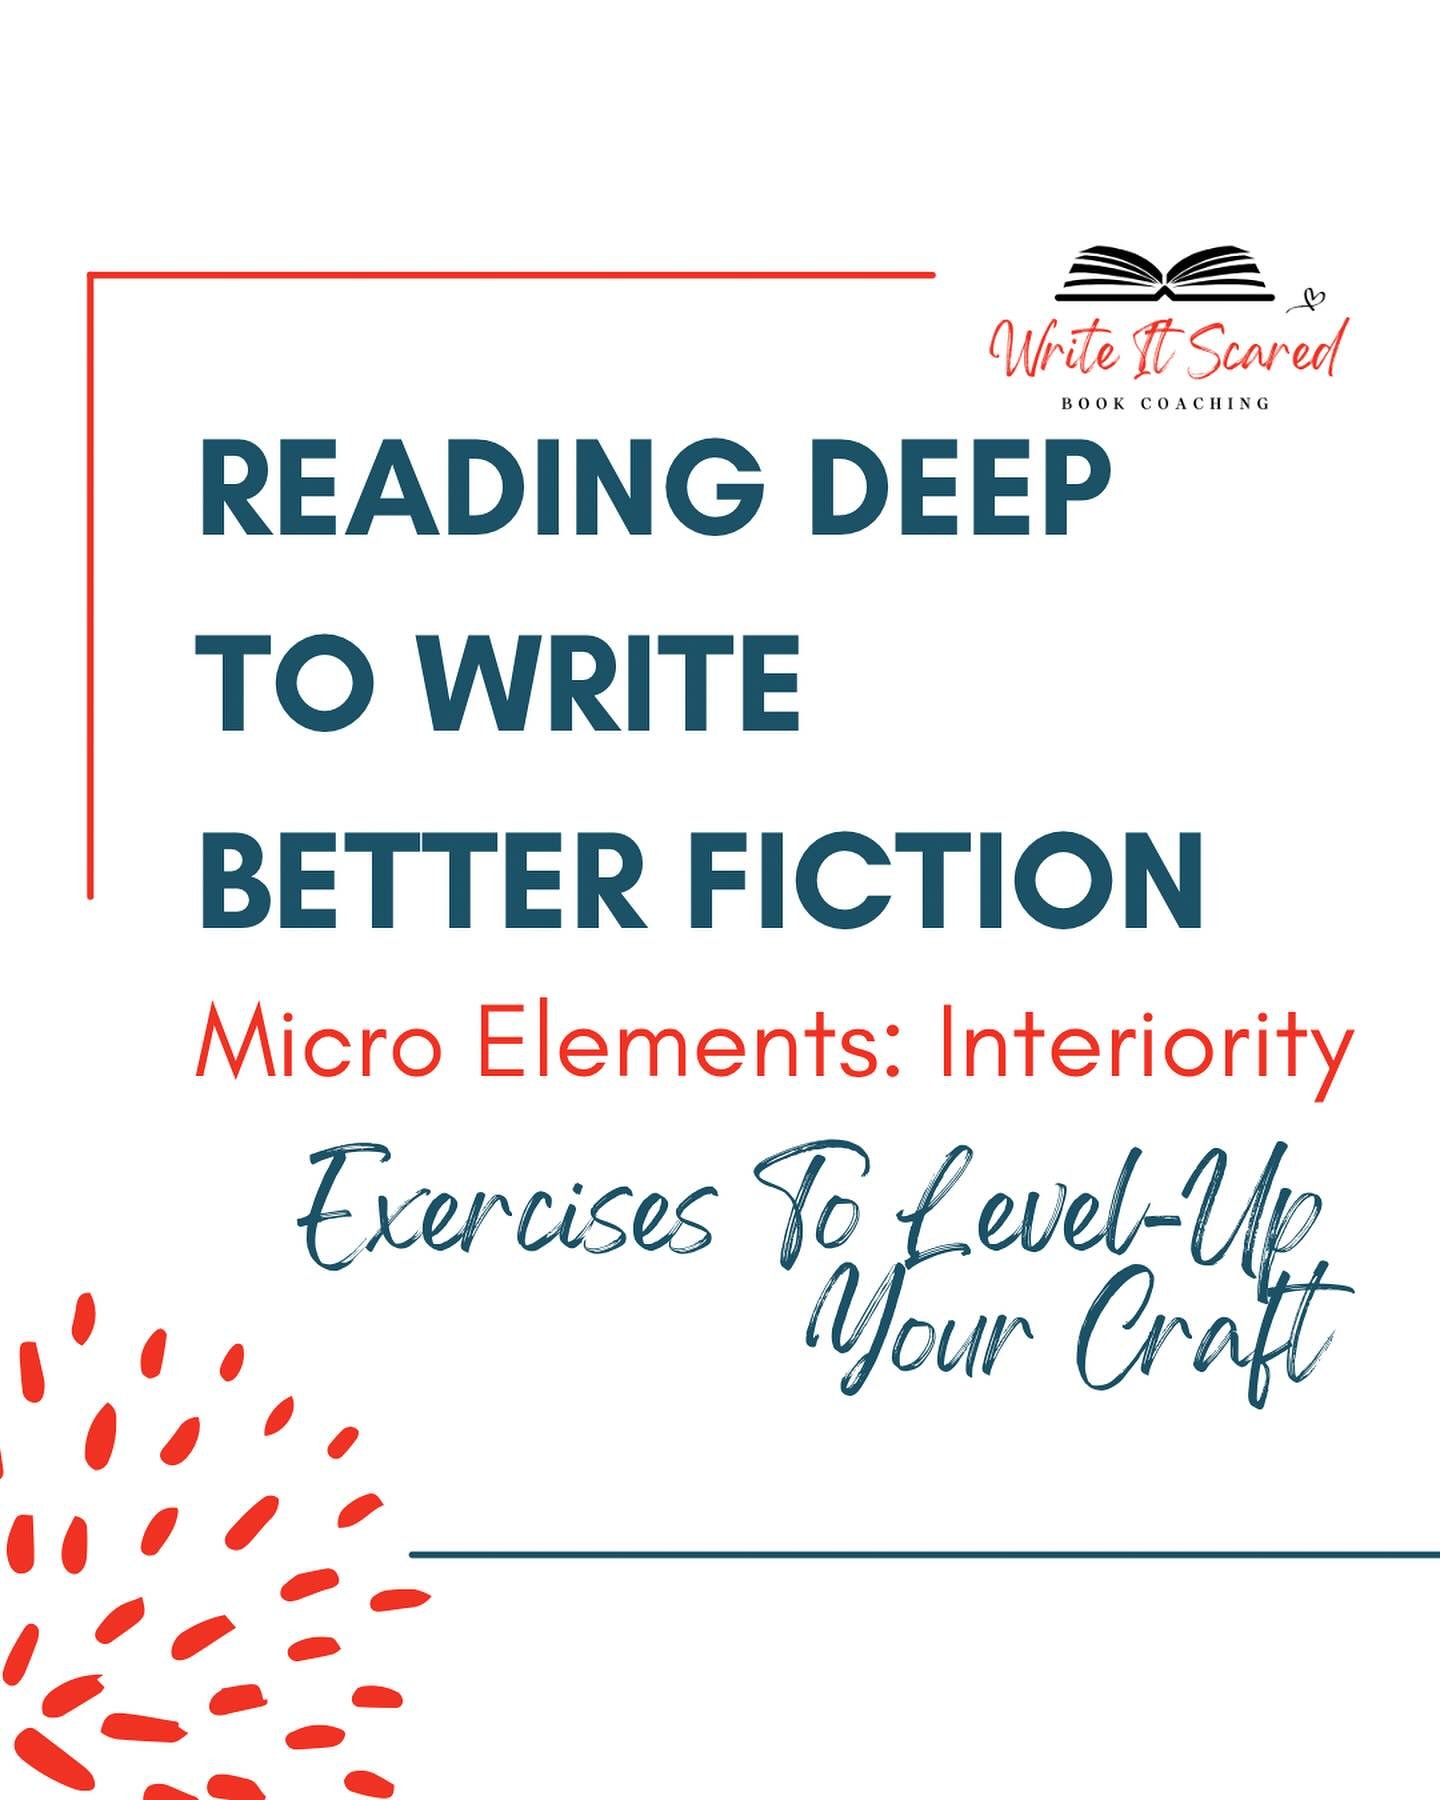 I love interiority, and many writers, especially those who are particularly empathetic, love it too. 

We get into the feels of it all. 

So here&rsquo;s how to apply it to your writing:

Type up a passage or two from the text you&rsquo;ve selected. 